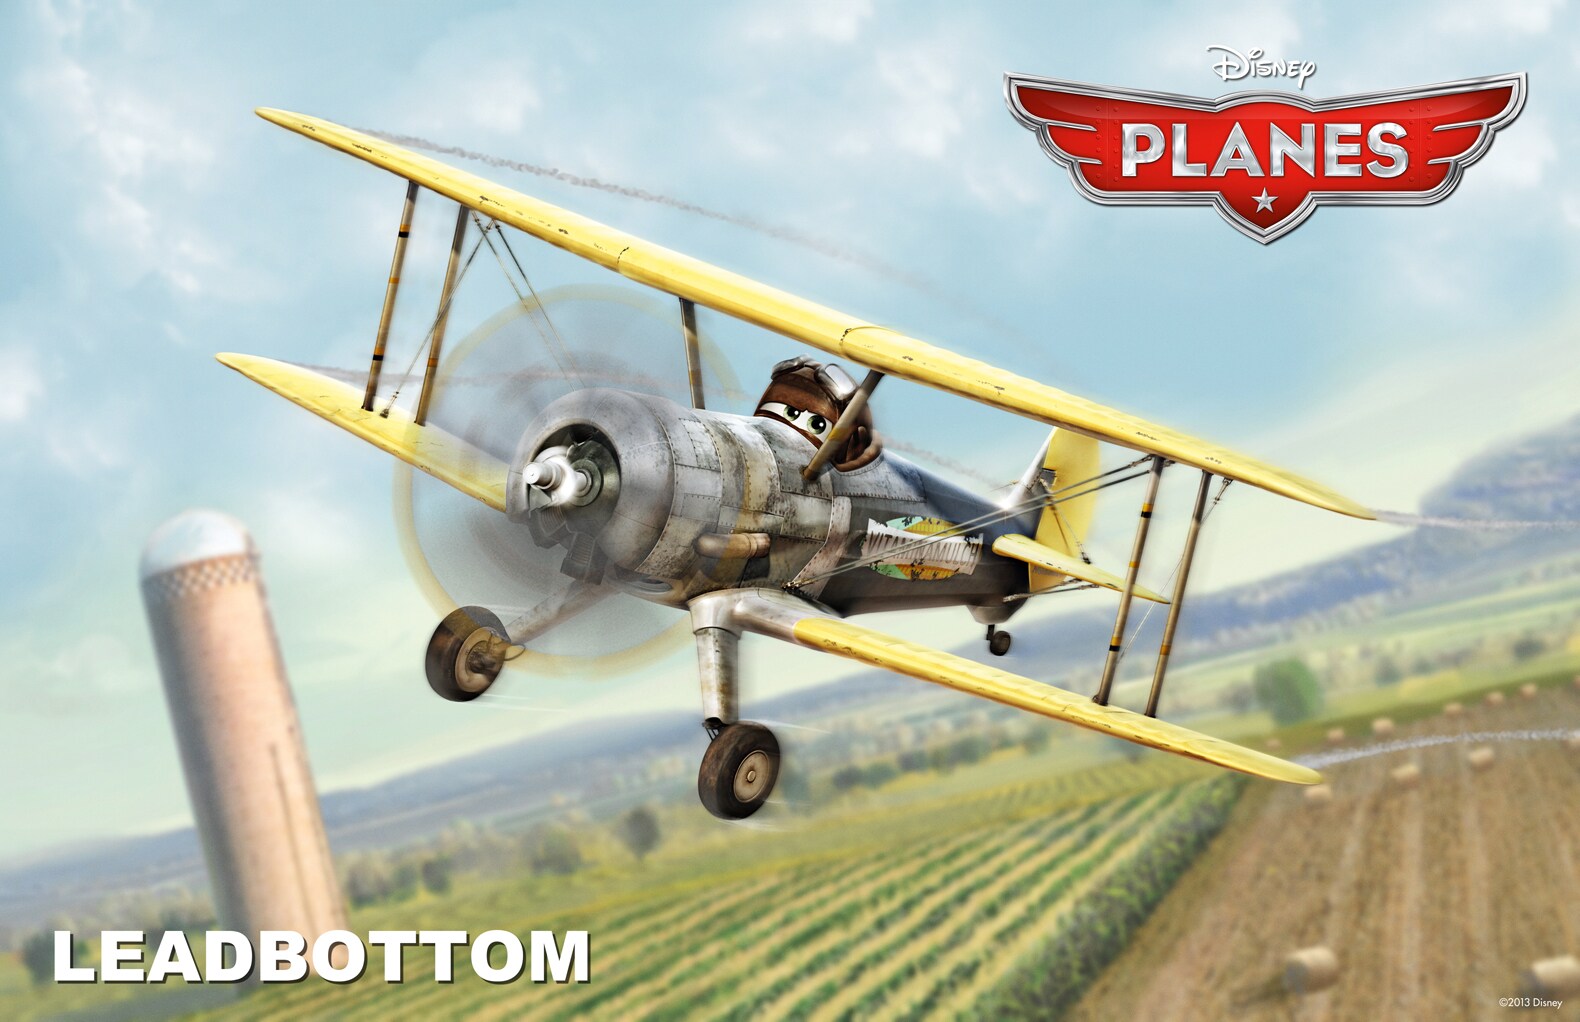 Leadbottom is a puttering old biplane and a grumbling taskmaster, a real “tank-half-empty” kind o...